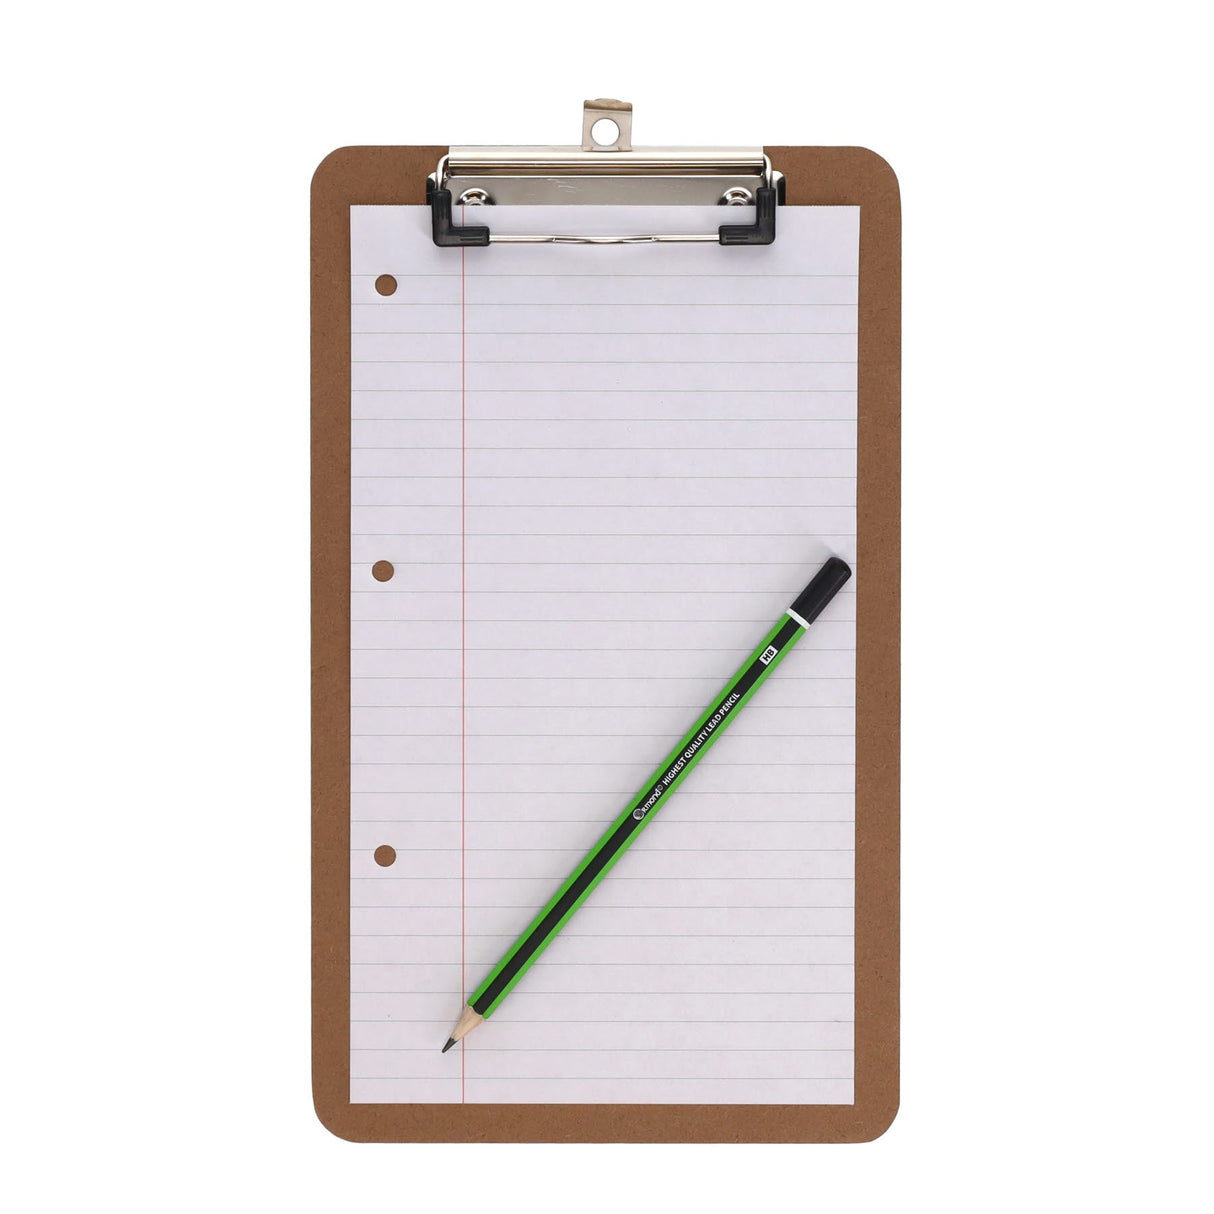 Concept 6.5x11 Wooden Clipboard | Stationery Shop UK